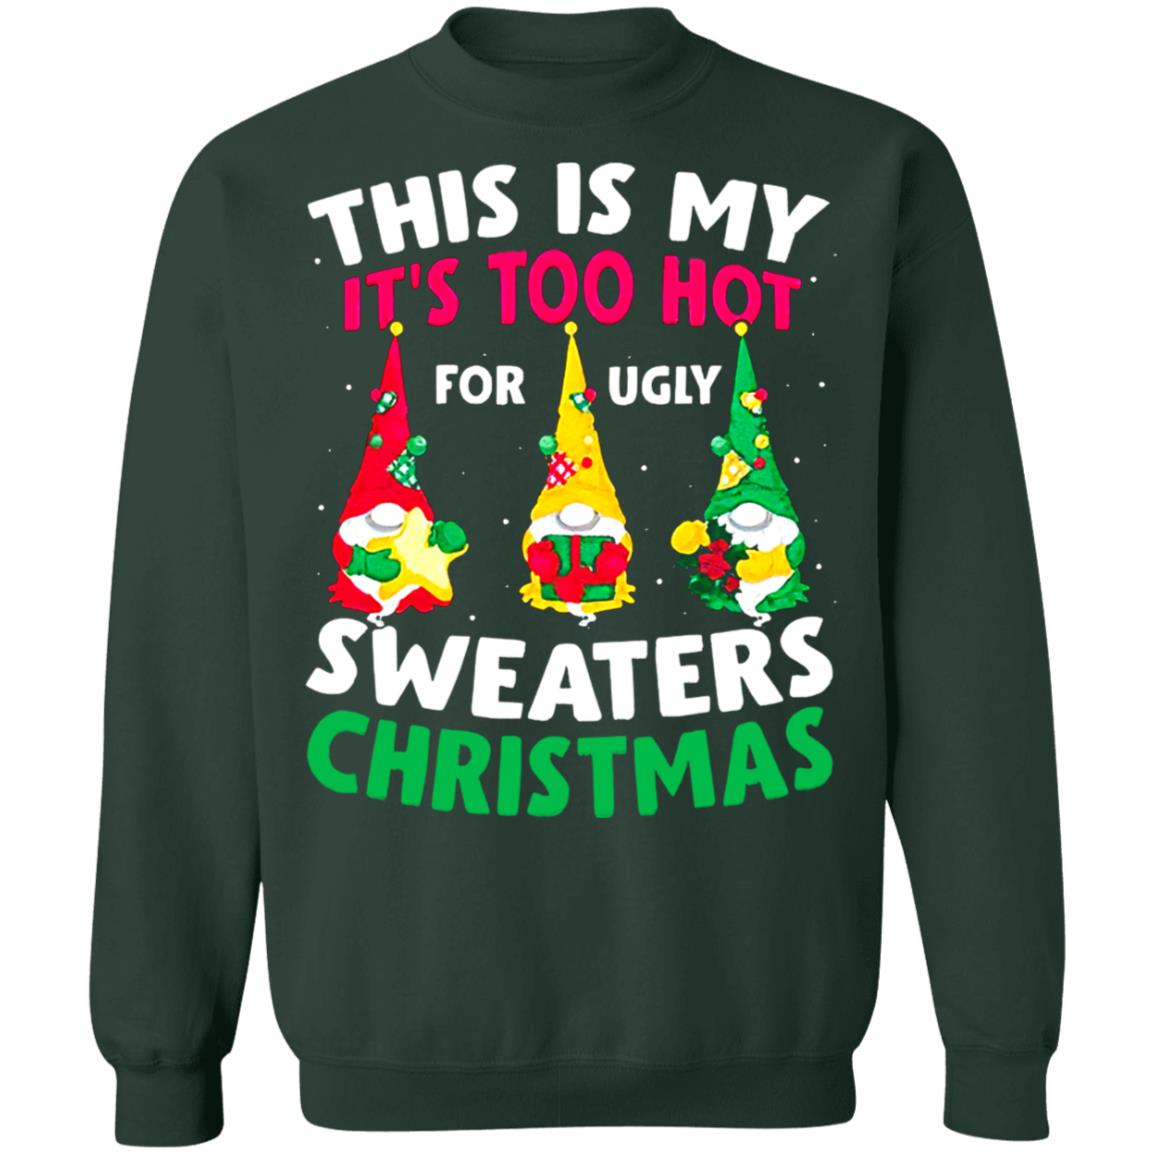 Gnomes This is my it's too hot for ugly sweaters Christmas shirt - Rockatee